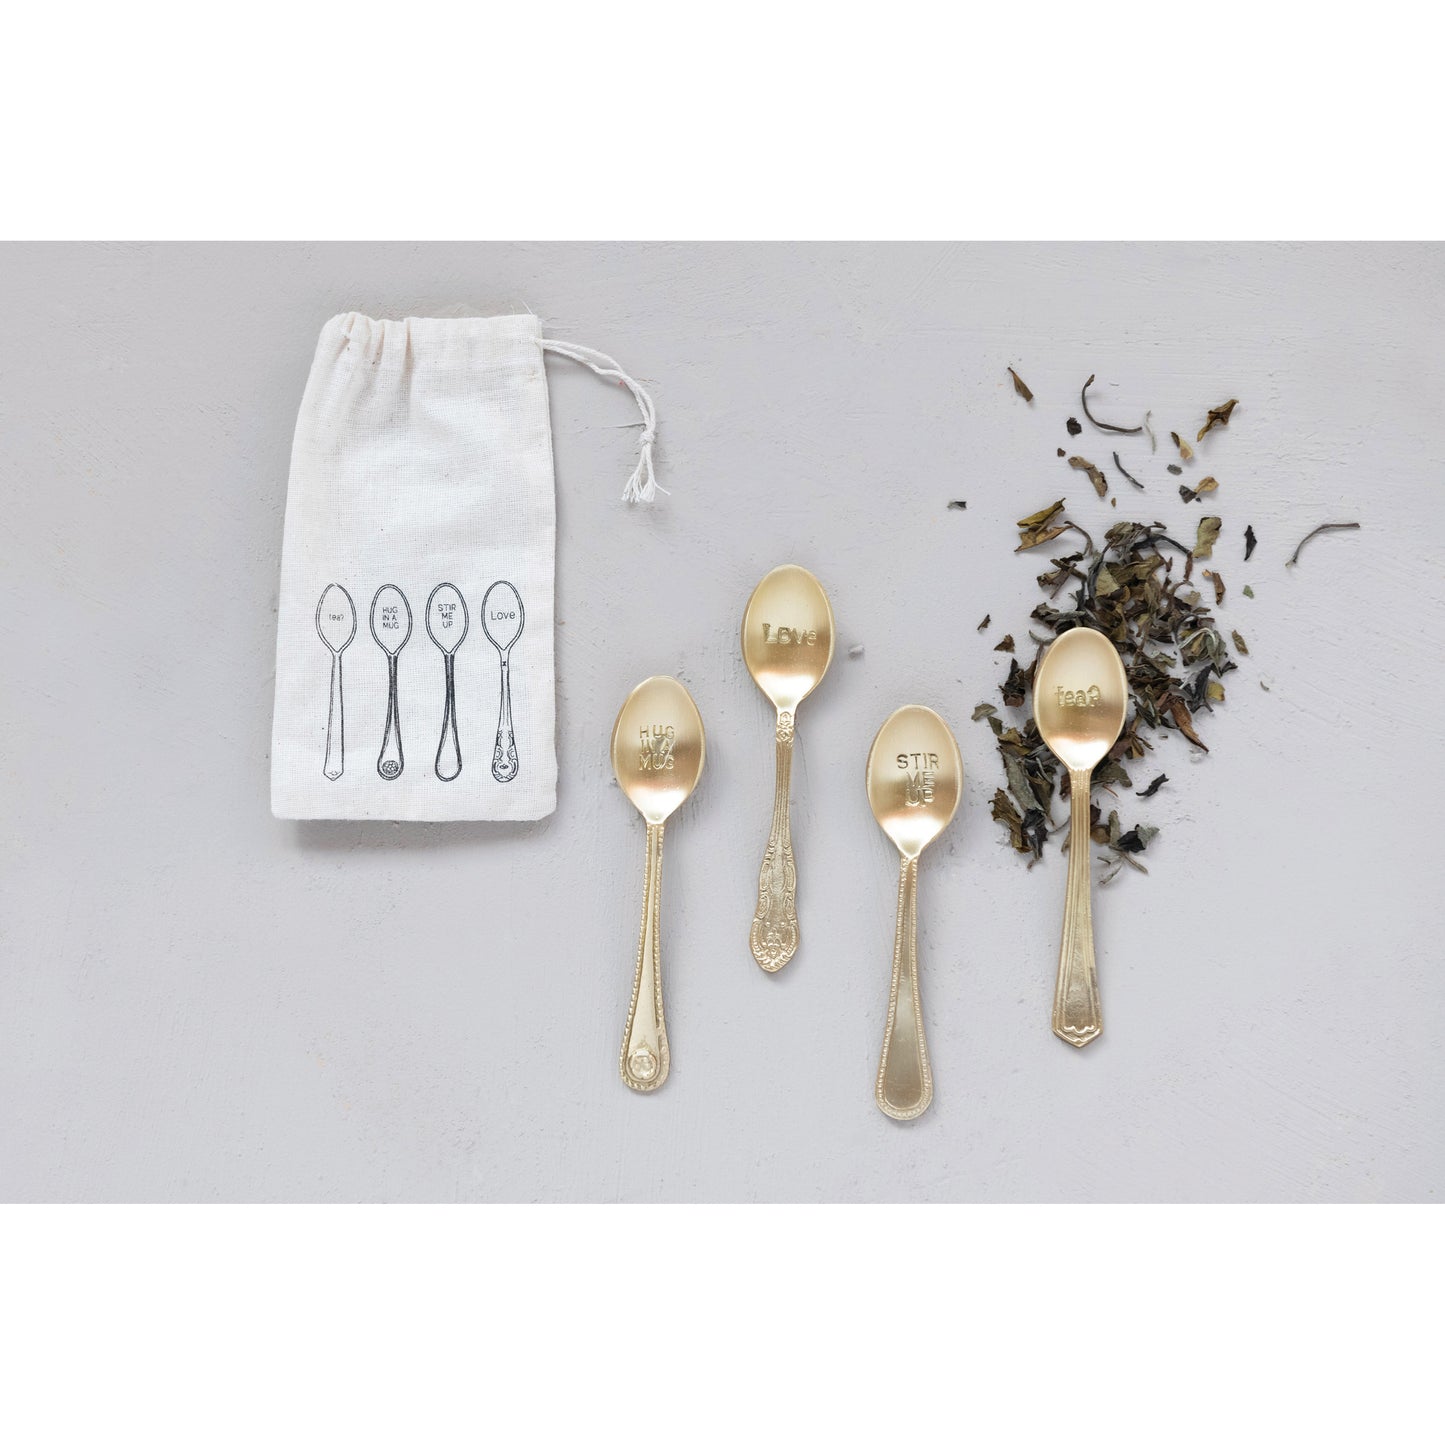 Brass Spoons with Engraved Saying, Set of 4 in Printed Drawstring Bag